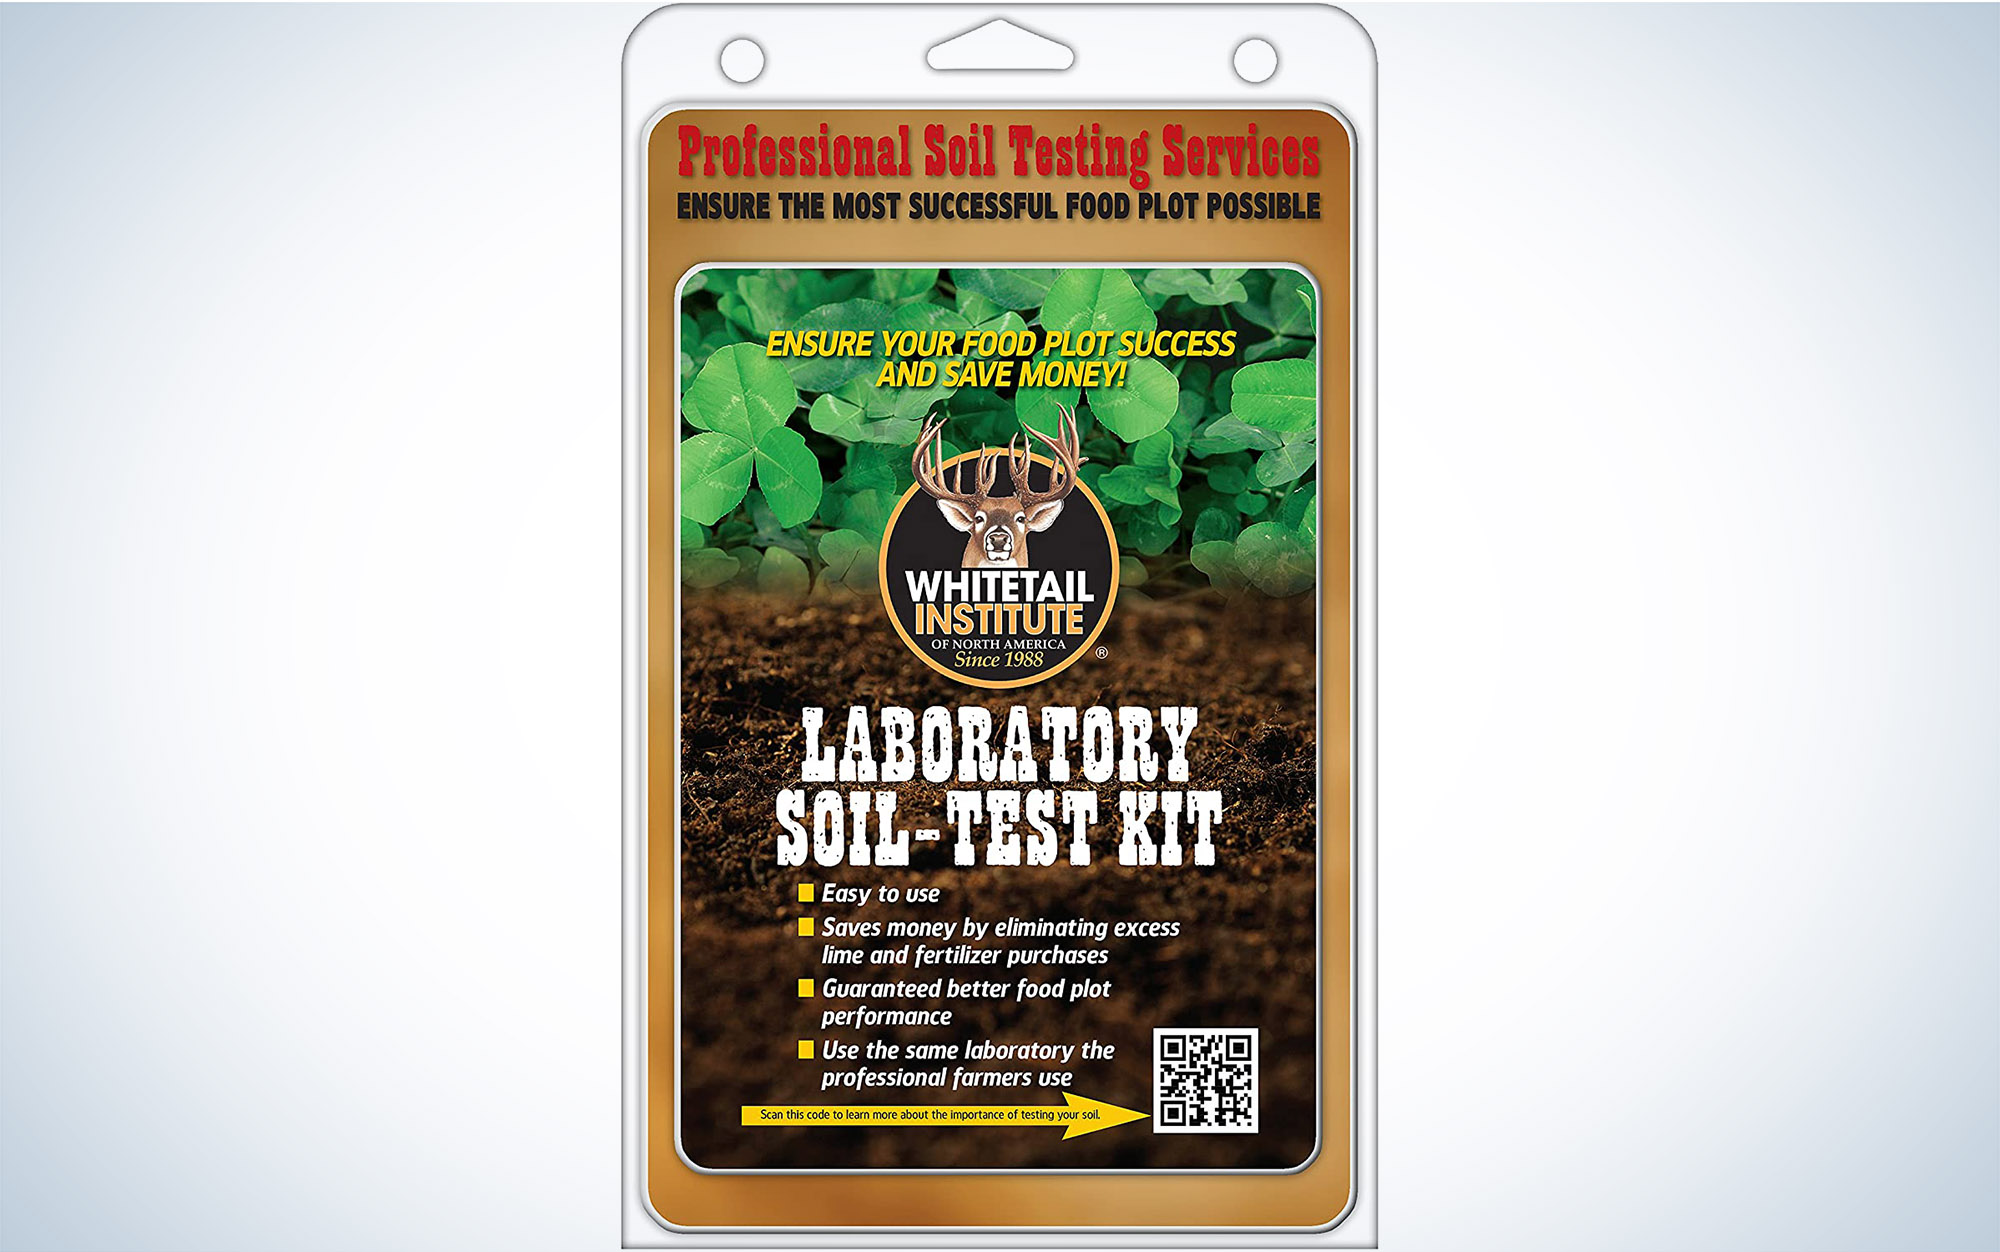 The Whitetail Institute Laboratory Soil Test Kit is one of the best soil test kits.